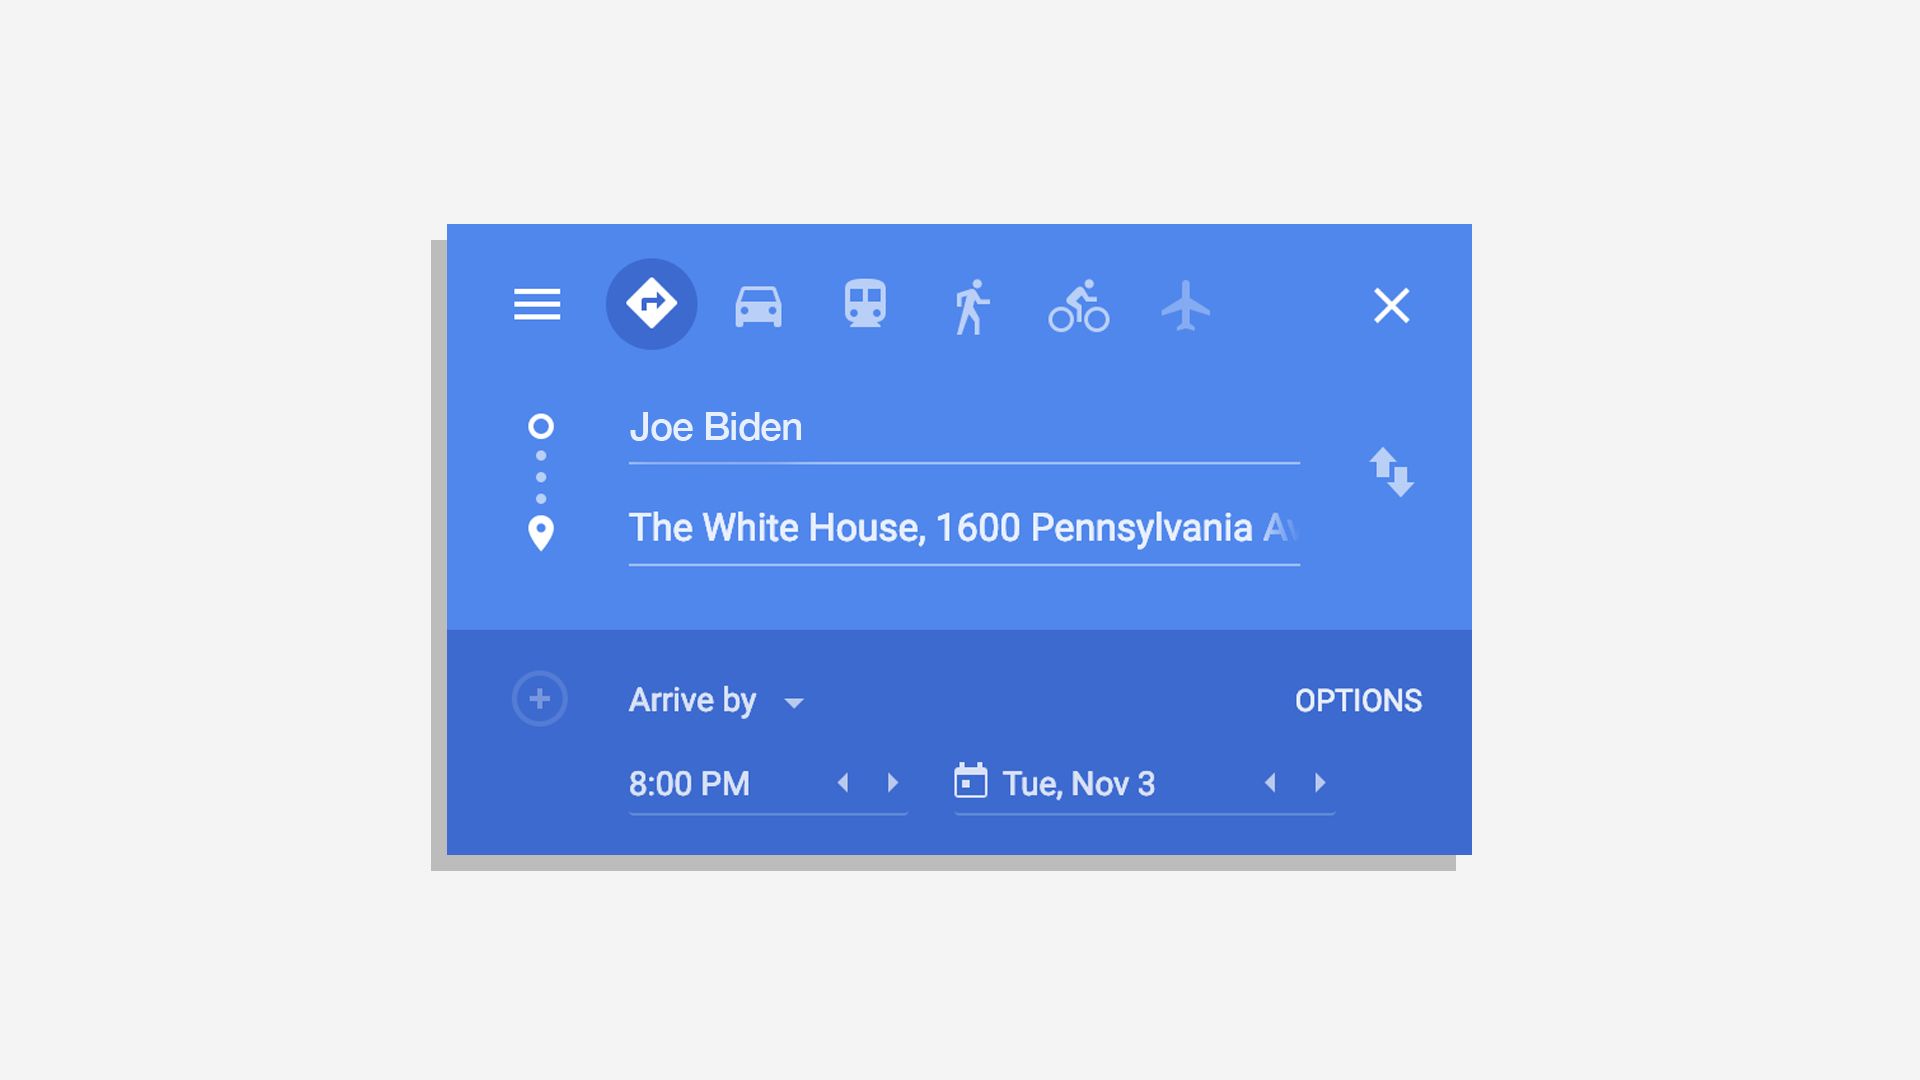 Illustration of a a Google Maps search for directions from Joe Biden to The White House